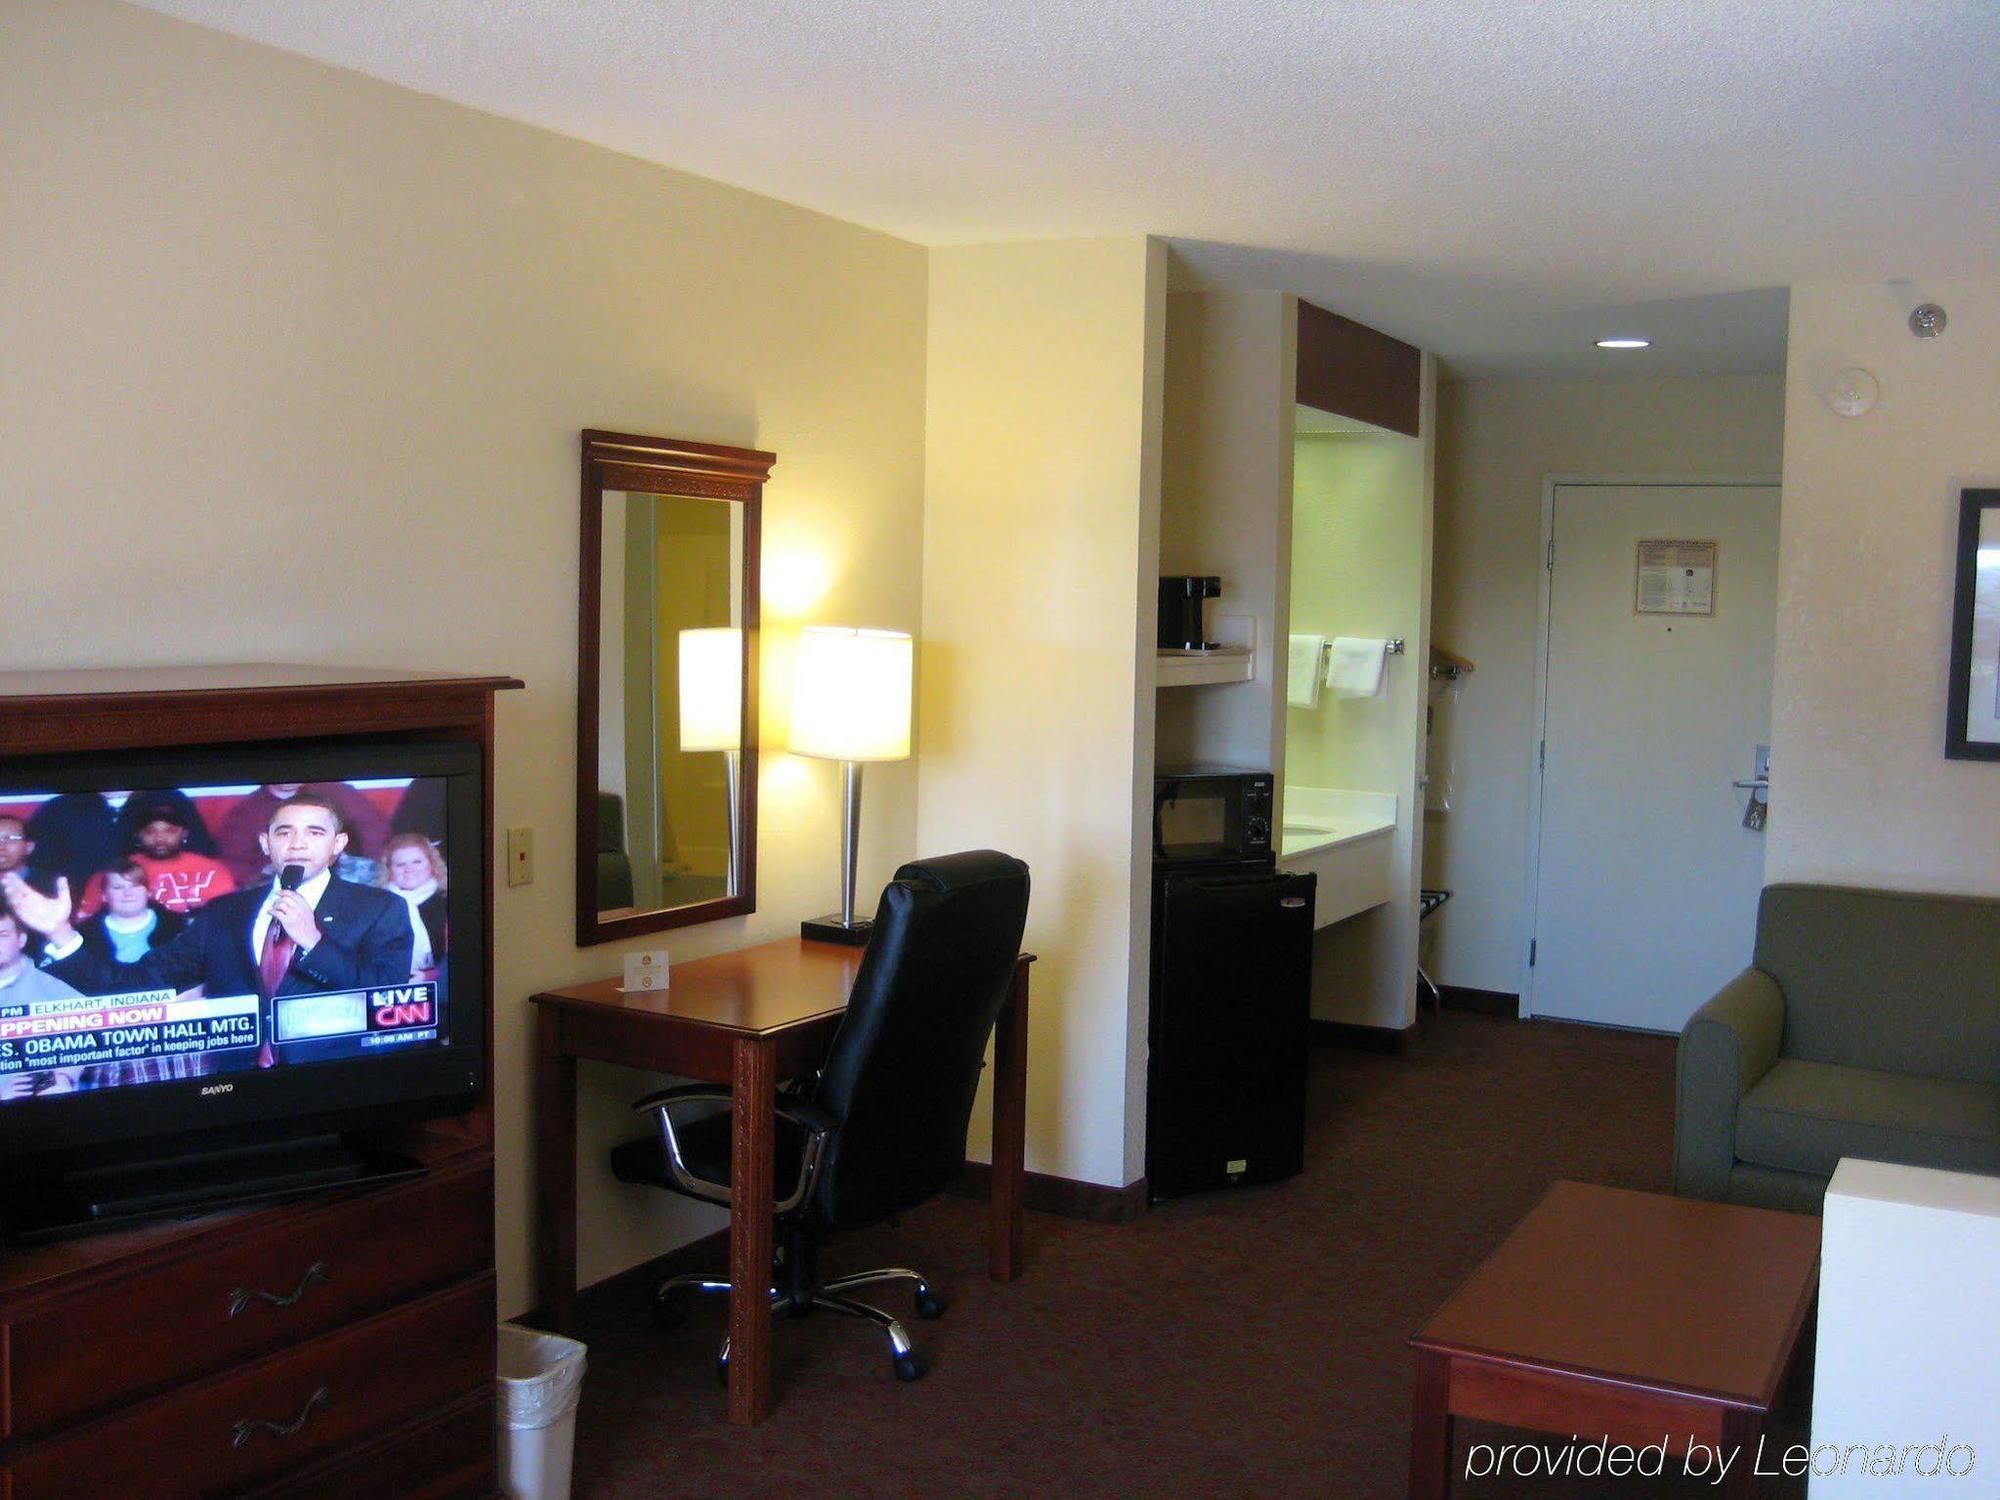 Quality Inn Montgomery South Hope Hull Chambre photo